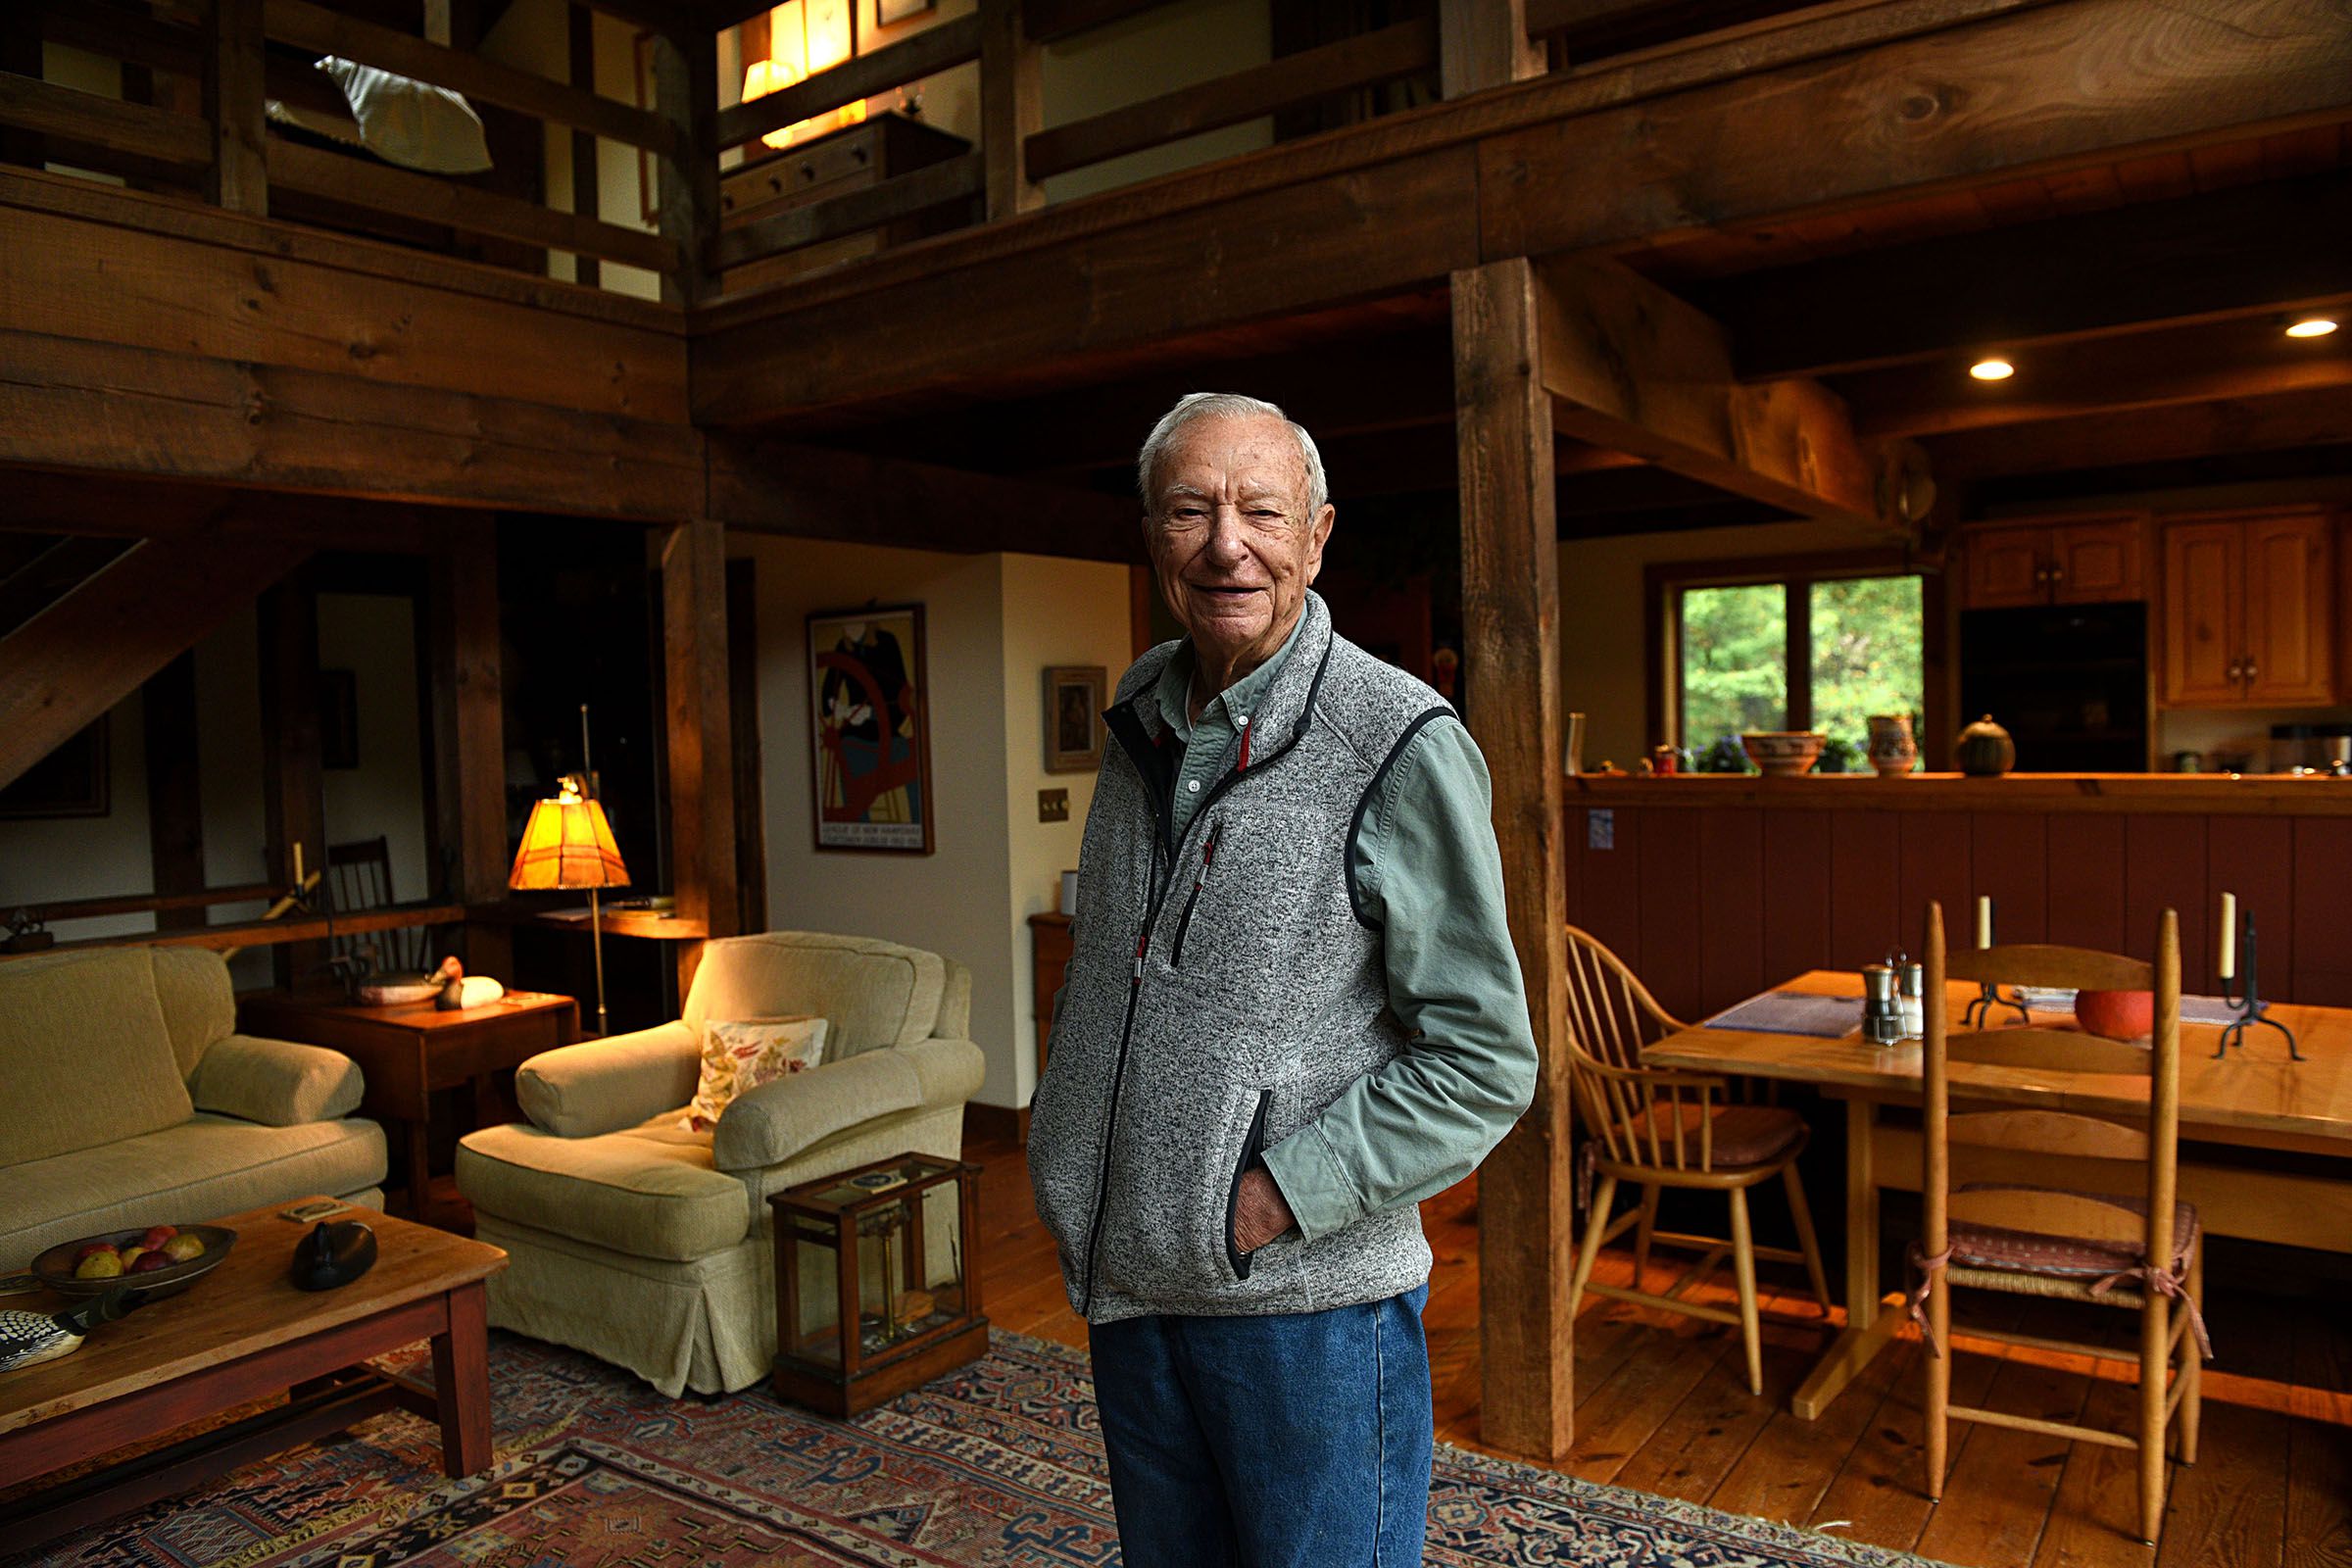 Longtime SCORE mentor Fred Thomas is photographed at his Thetford, Vt., home on Sept. 20, 2018. (Valley News - Jennifer Hauck) Copyright Valley News. May not be reprinted or used online without permission. Send requests to permission@vnews.com.